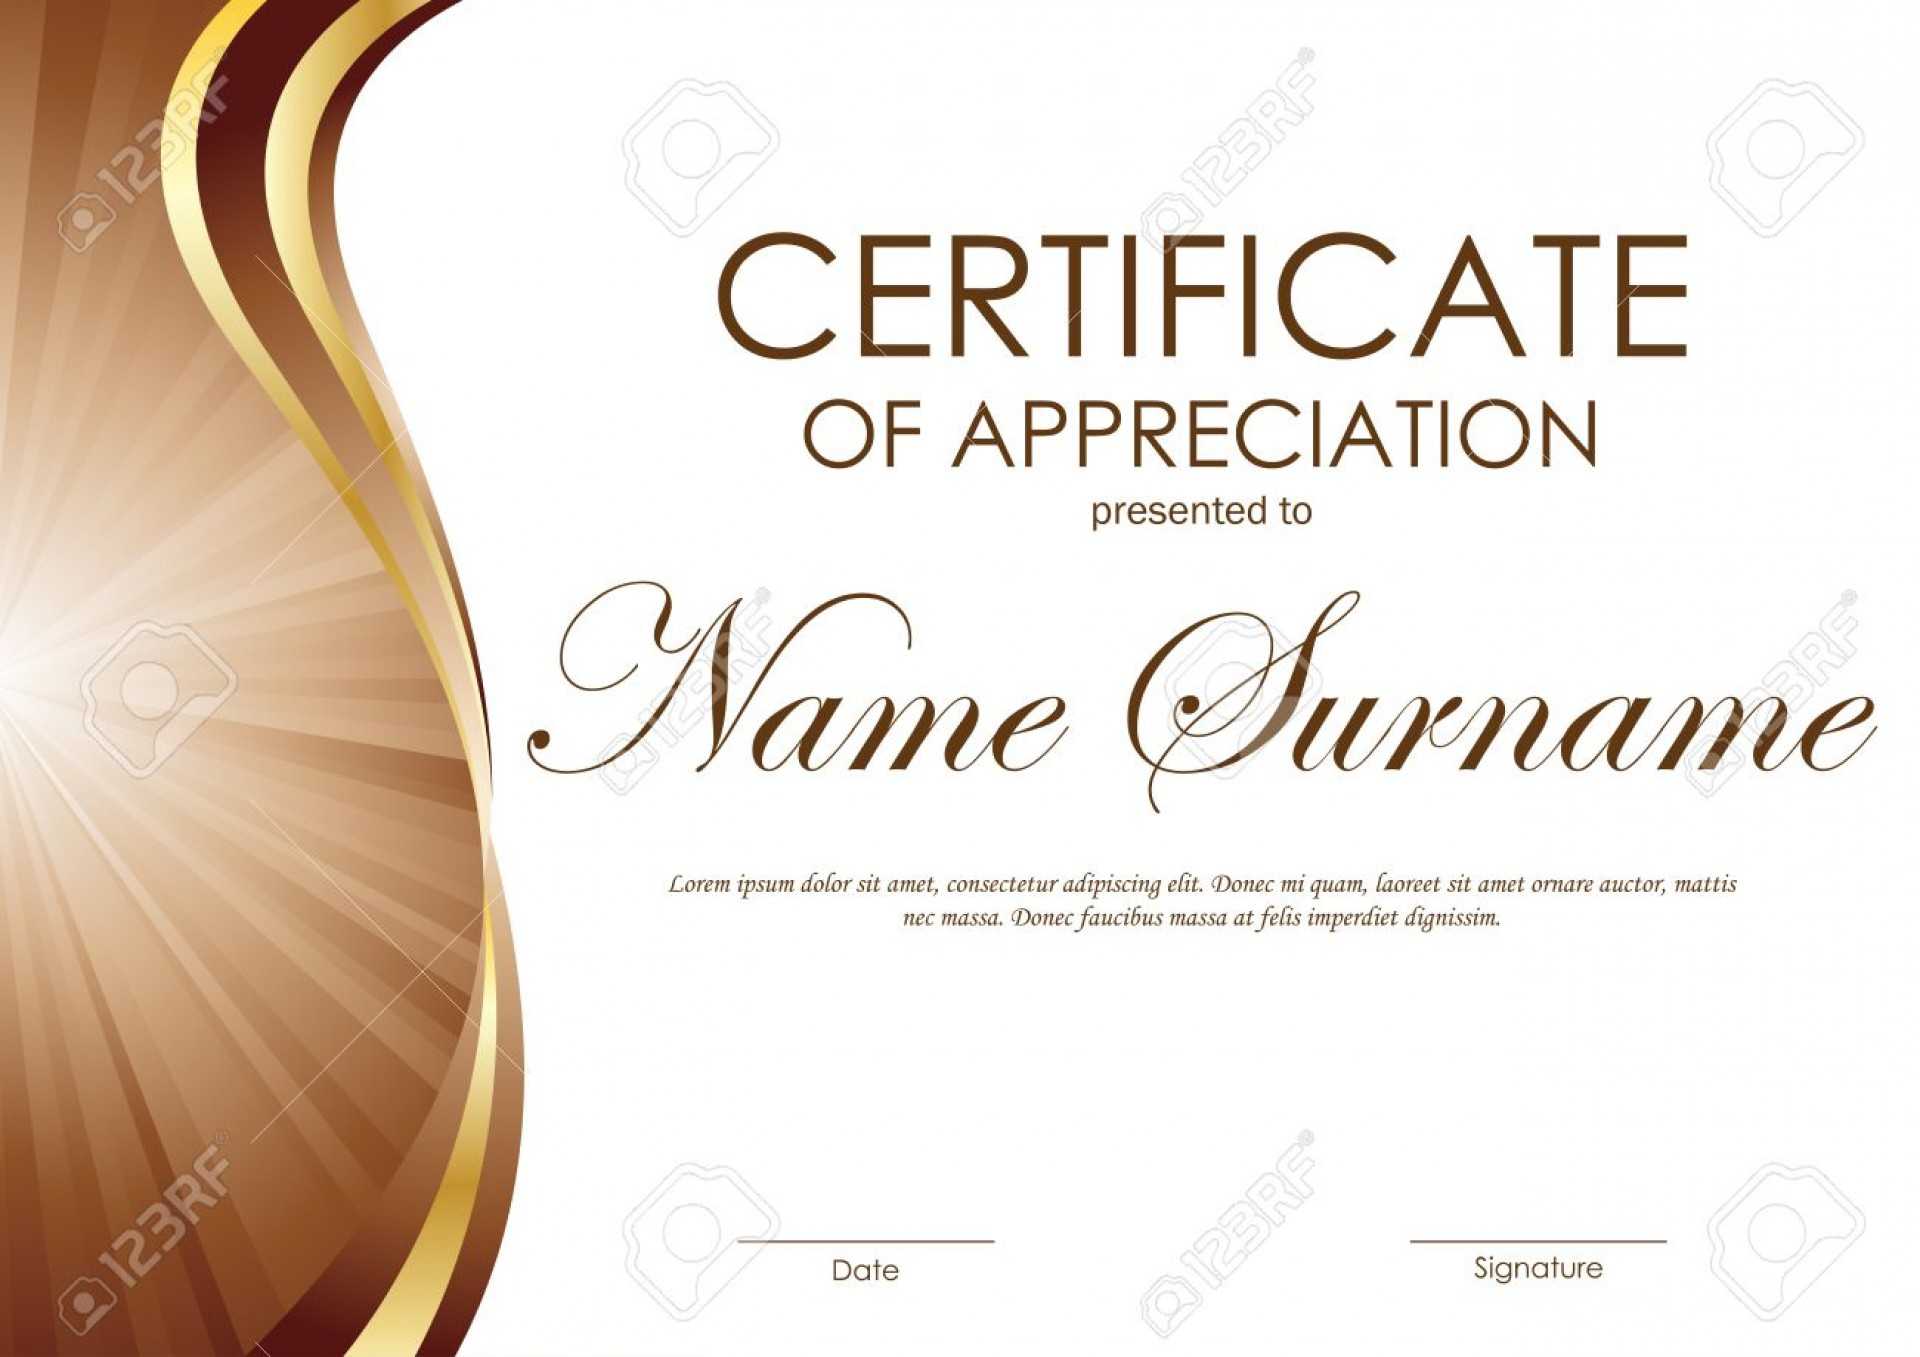 013 Certificate Of Appreciation Template Free With Brown And Intended For Template For Certificate Of Appreciation In Microsoft Word